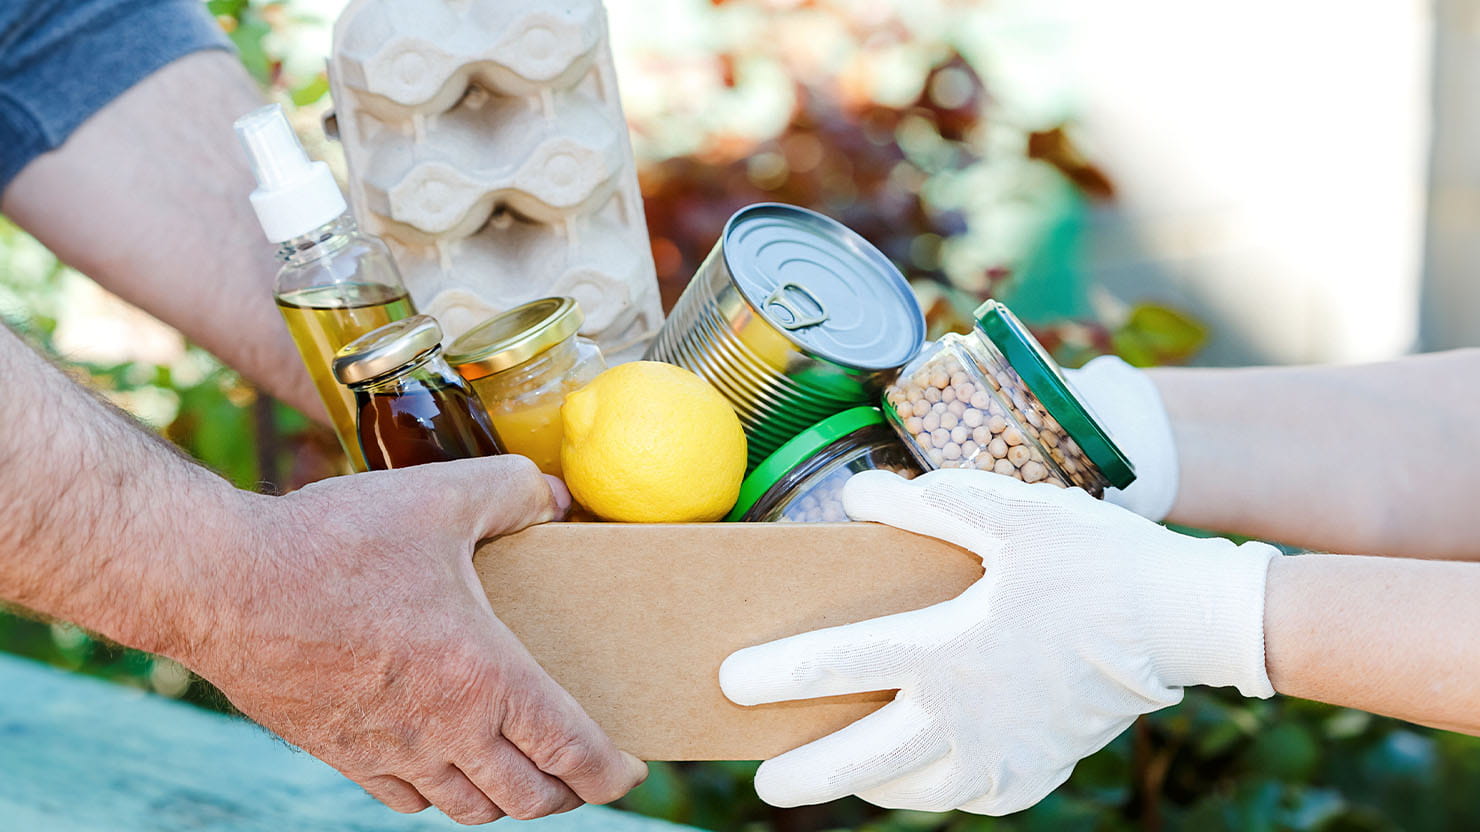 The Importance of Food Banks in Alleviating Hunger